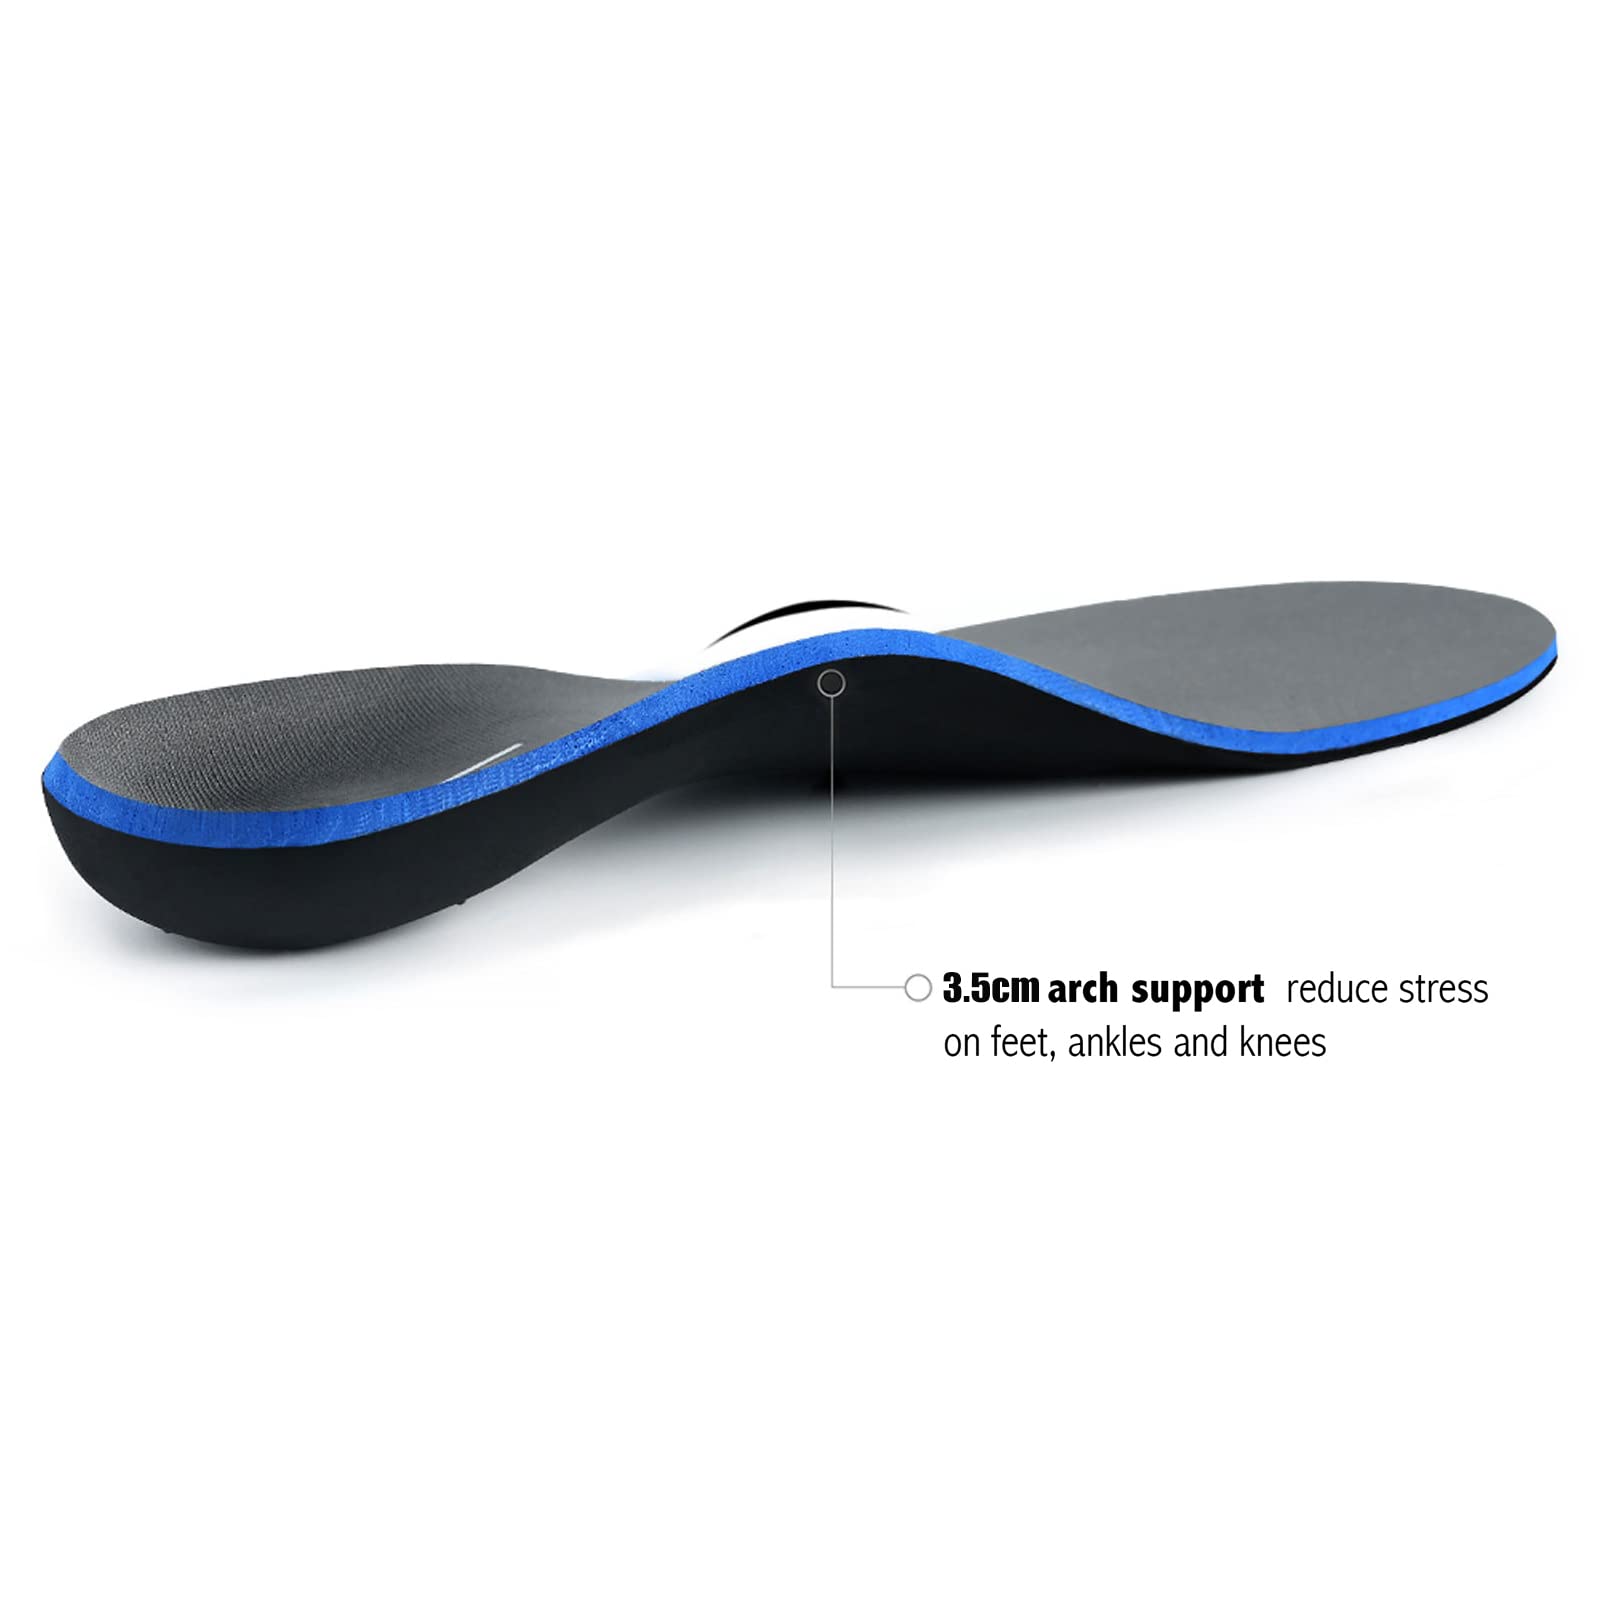 Plantar Fasciitis Feet Insoles Arch Supports Orthotics Inserts Relieve Flat Feet, High Arch, Foot Pain Mens 13-13 1/2